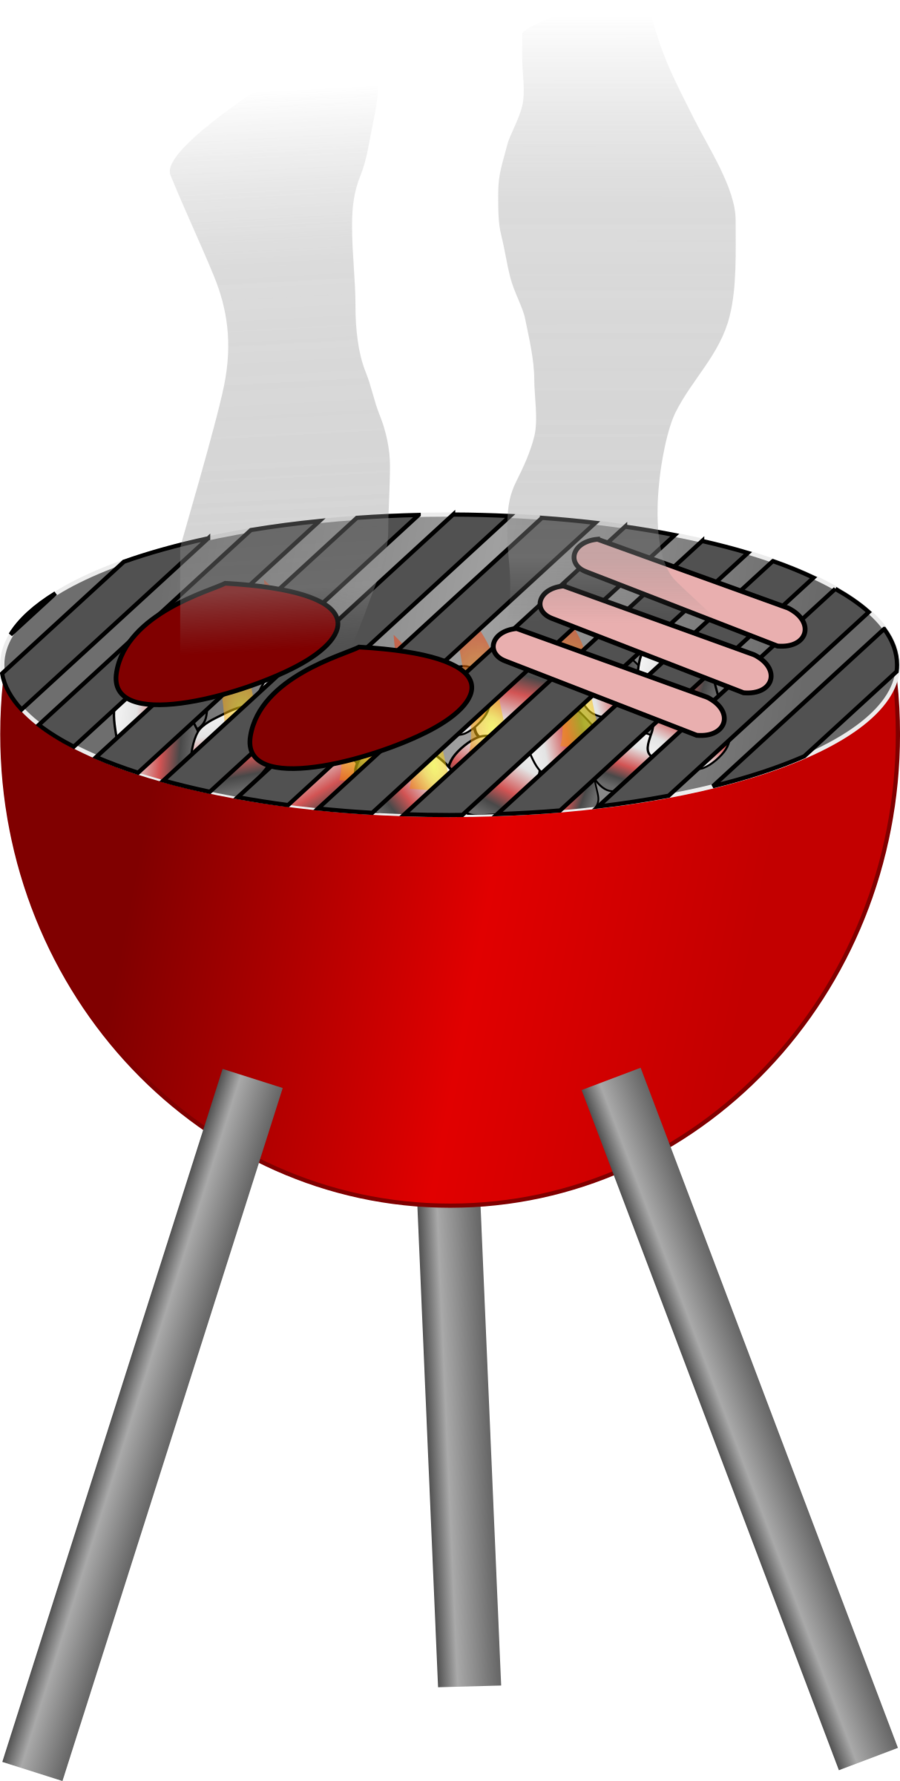 Grill clipart cartoon. Table barbecue transparent clip